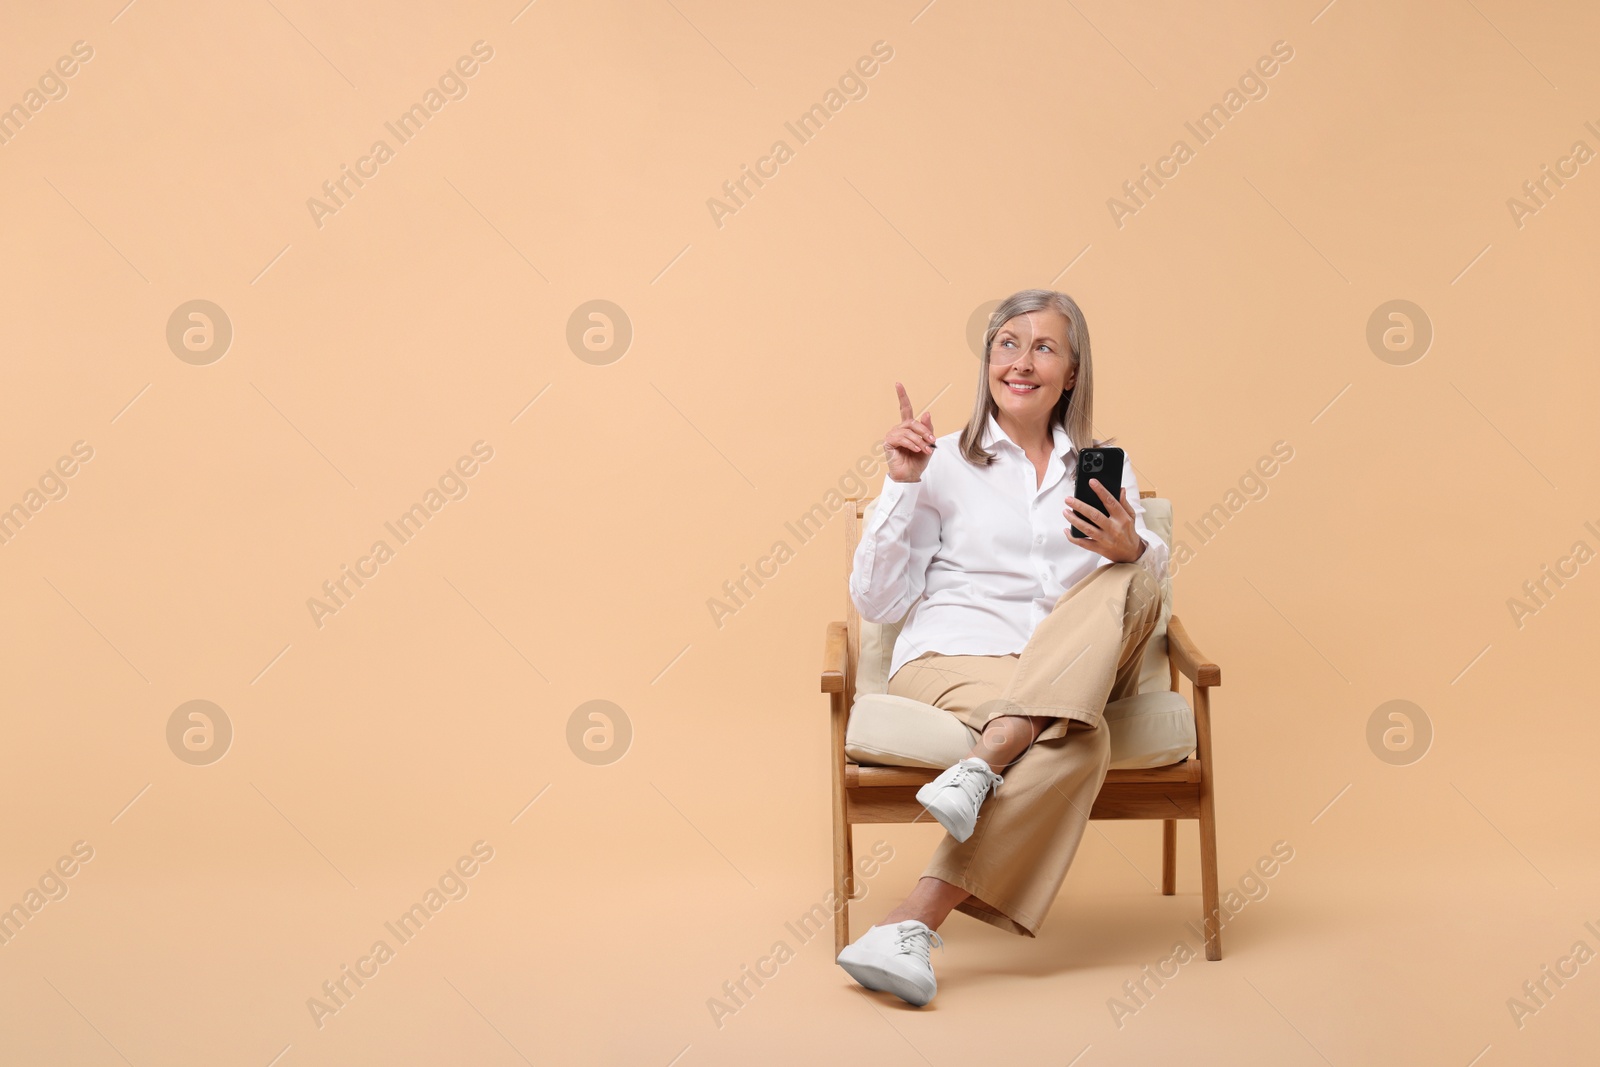 Photo of Senior woman with phone on armchair against beige background, space for text